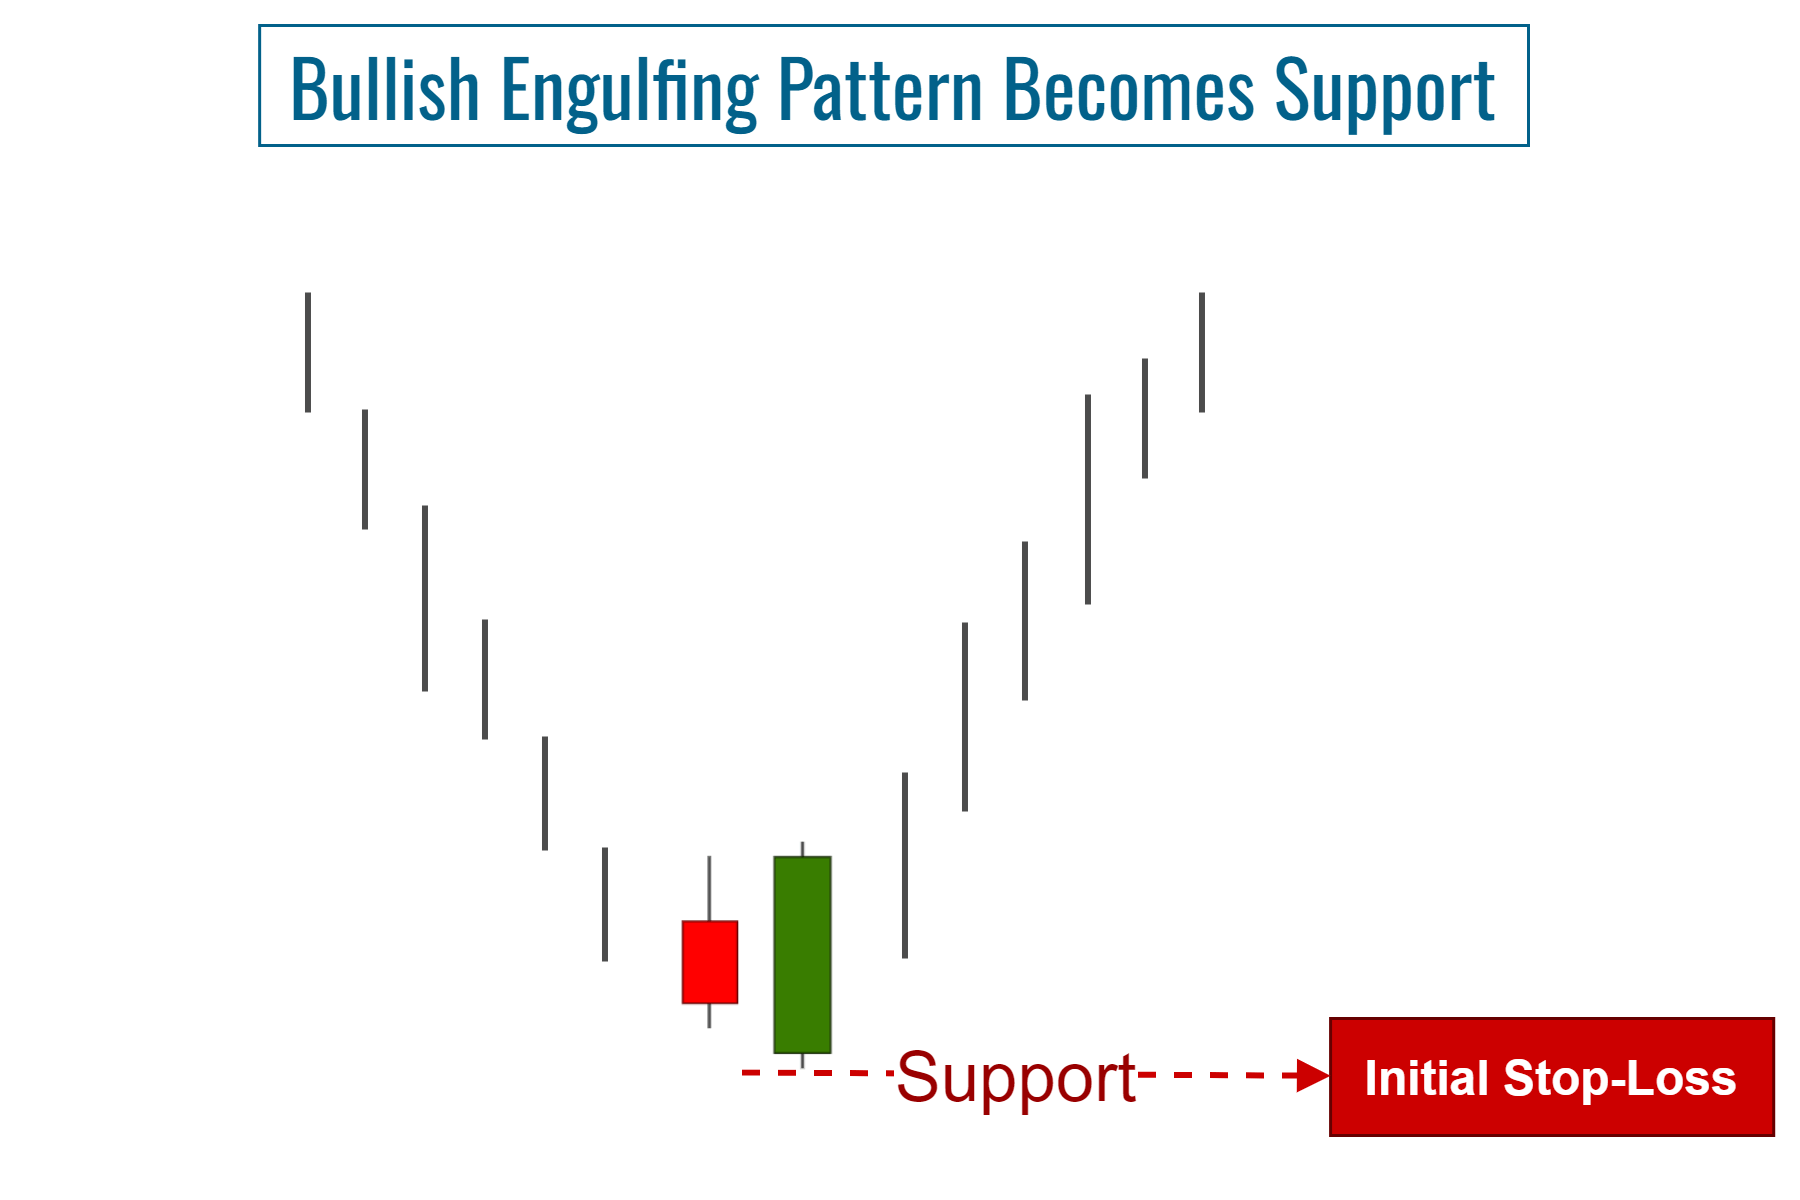 Initial Stop-Loss for a Bullish Engulfing Pattern